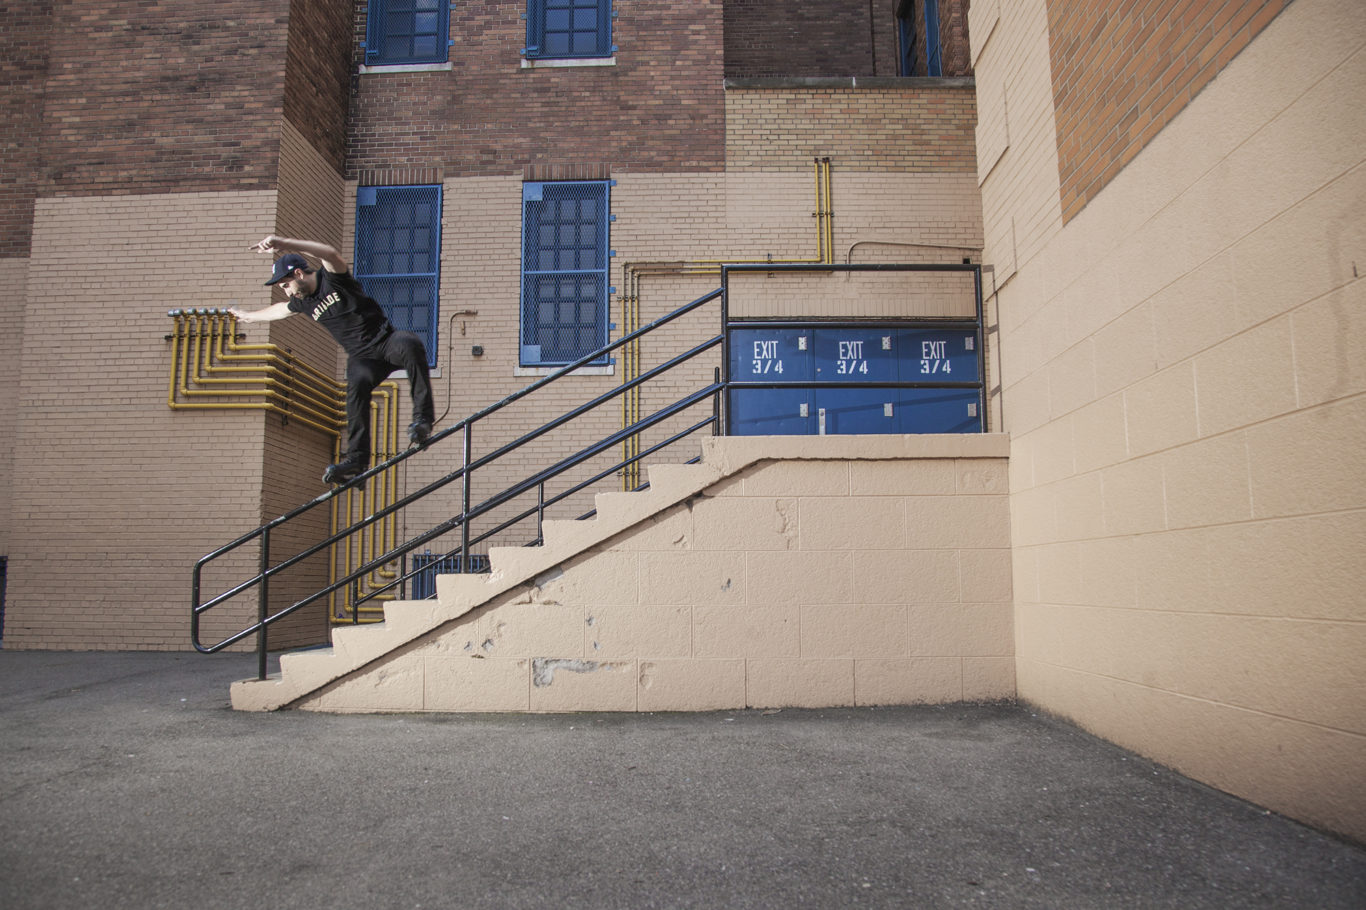 SWITCH FRONT  ROYALE - SUNNYSIDE QUEENS, NY - PHOTOGRAPH BY RYAN LOEWY FOR BE-MAG